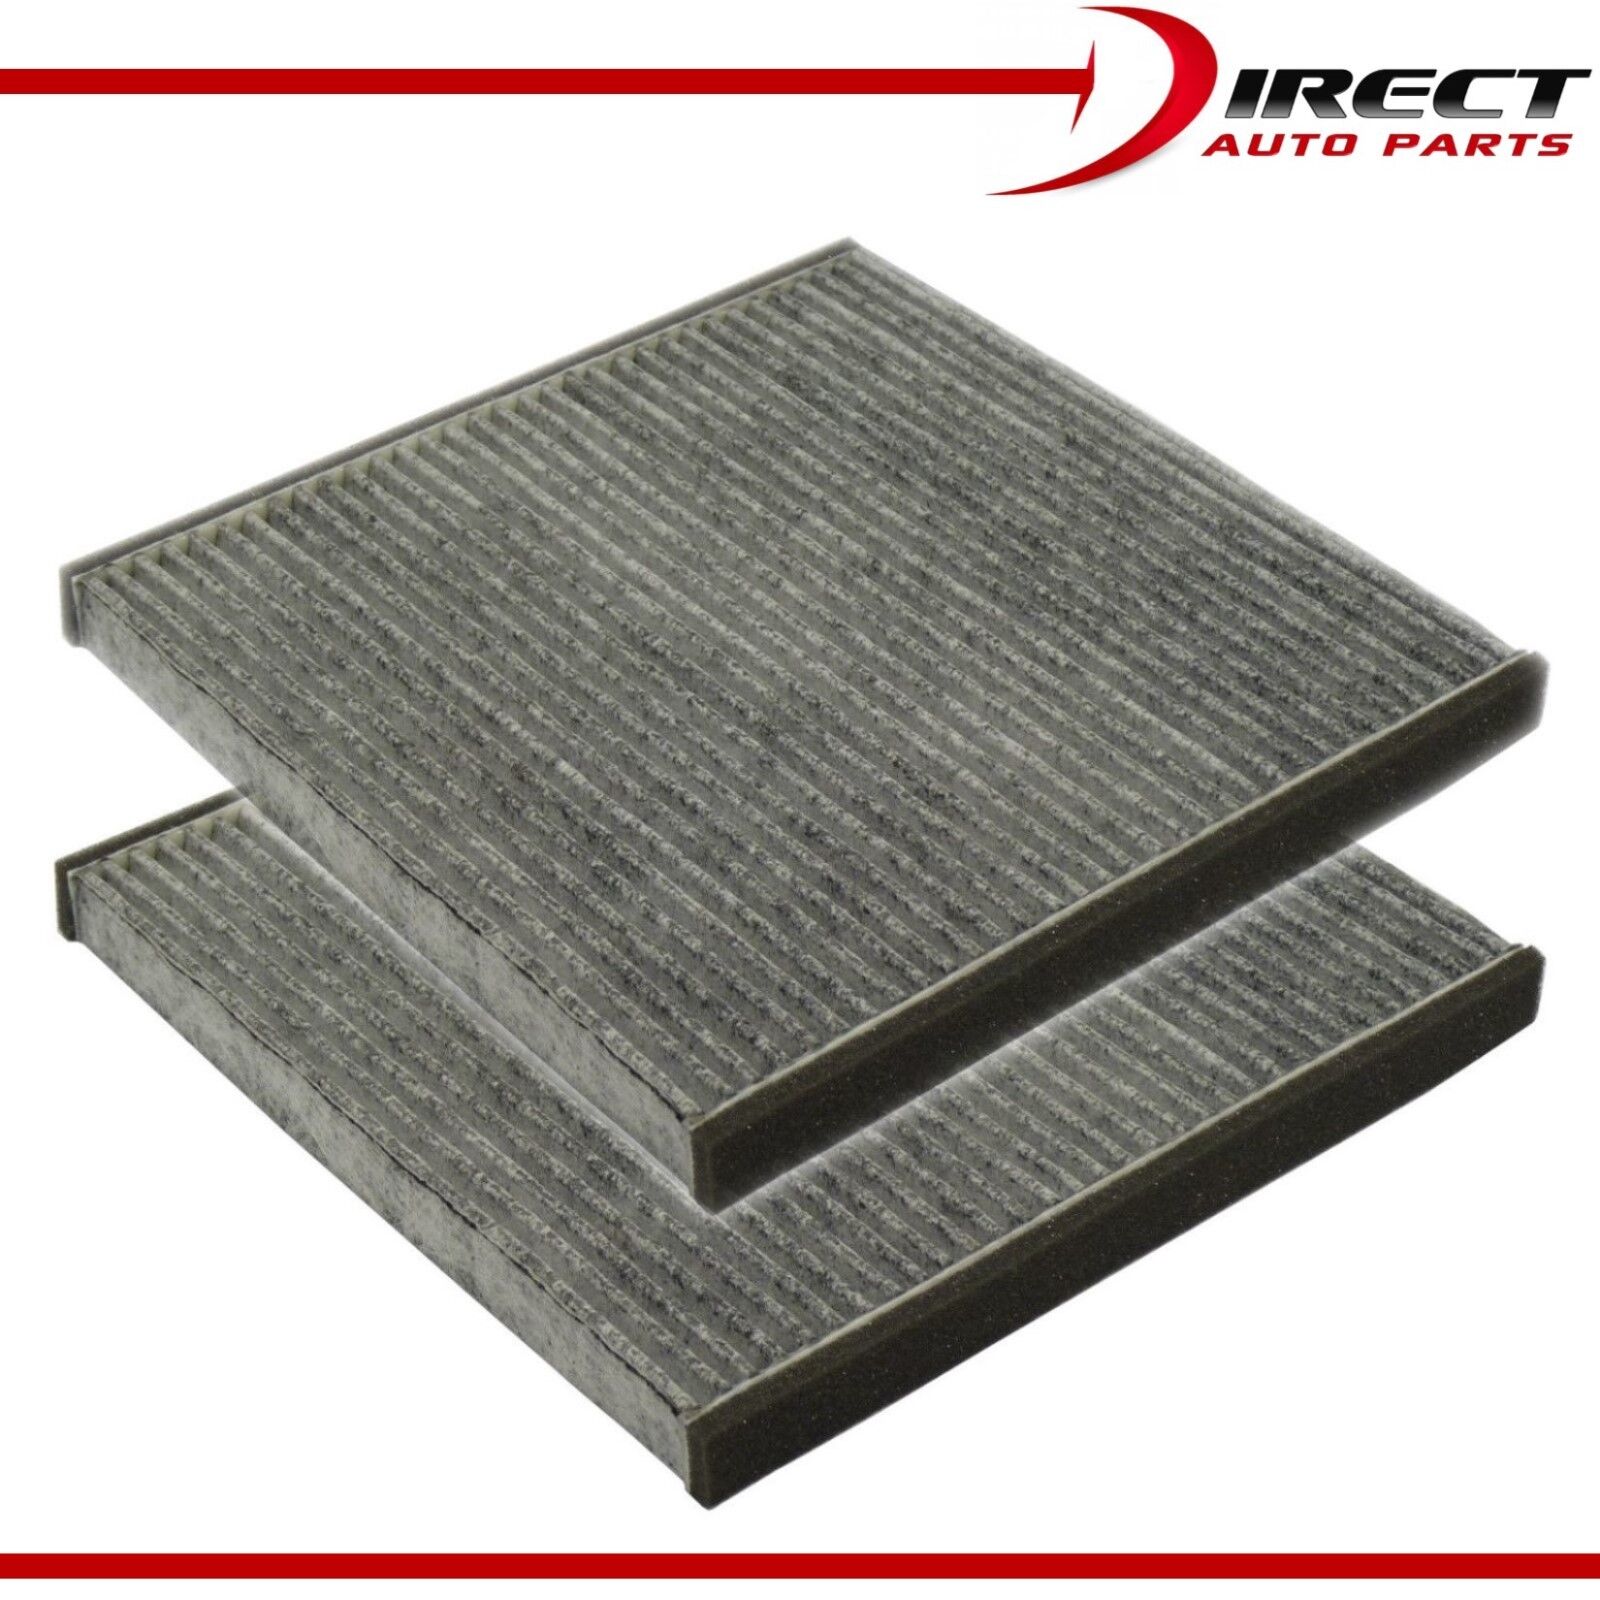 2 PACK CARBON CABIN AIR FILTER 88568-02020 FOR TOYOTA COROLLA MATRIX 1.8L